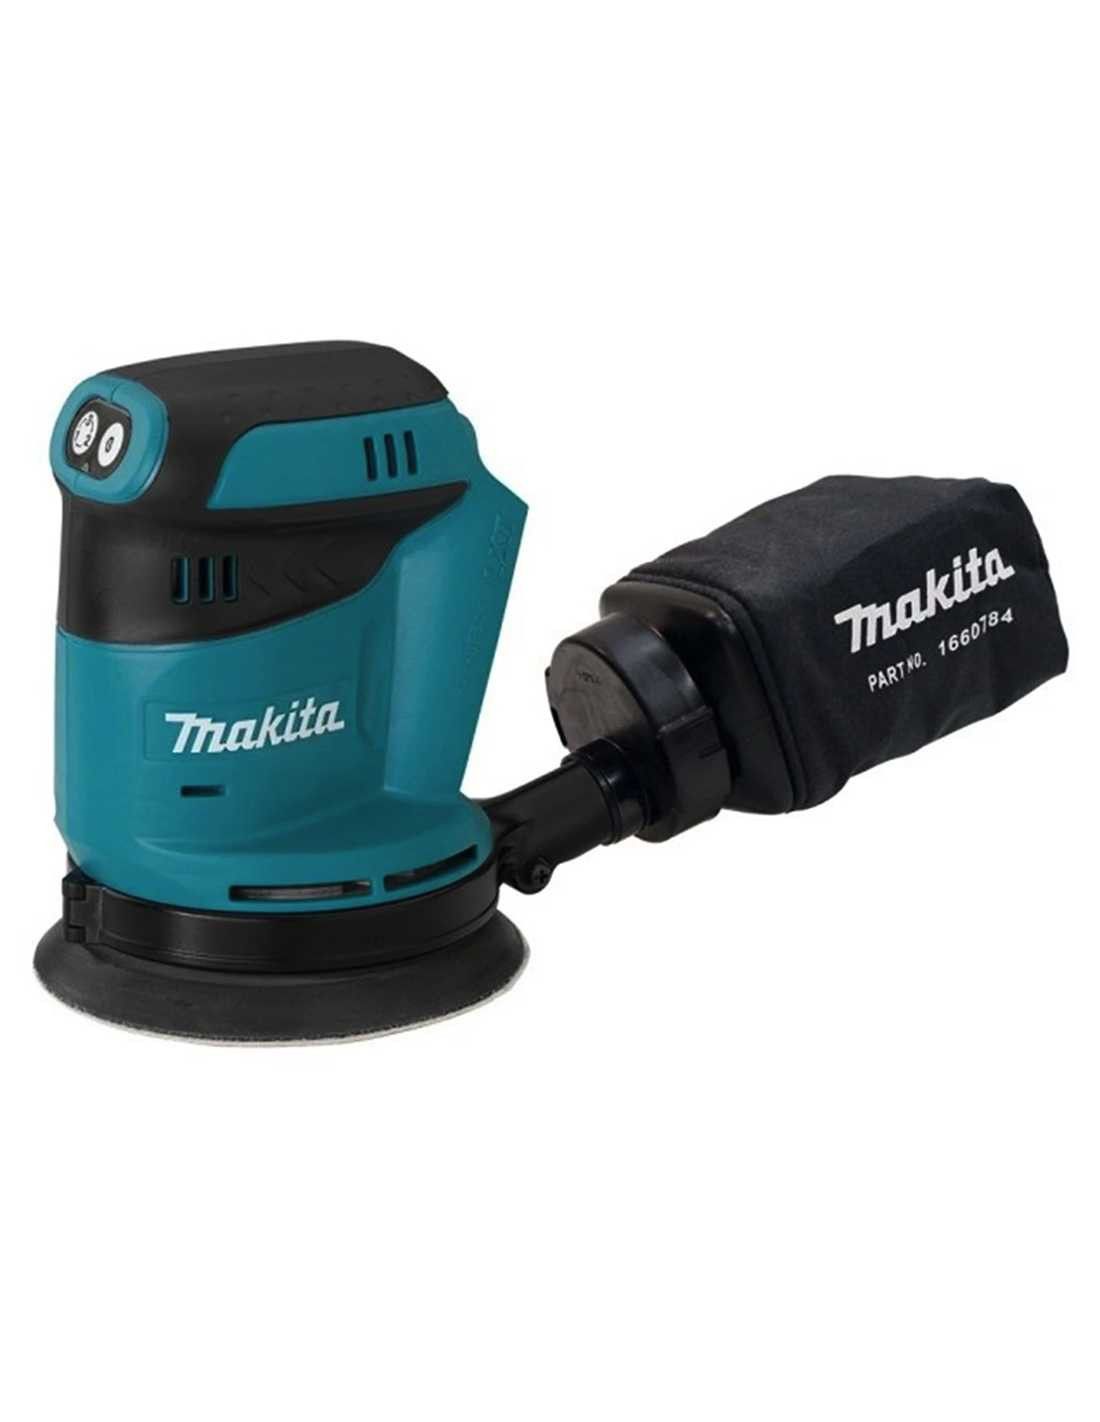 Makita kit with 11 tools + 3 bat + charger + 2 bags DLX1143BL3